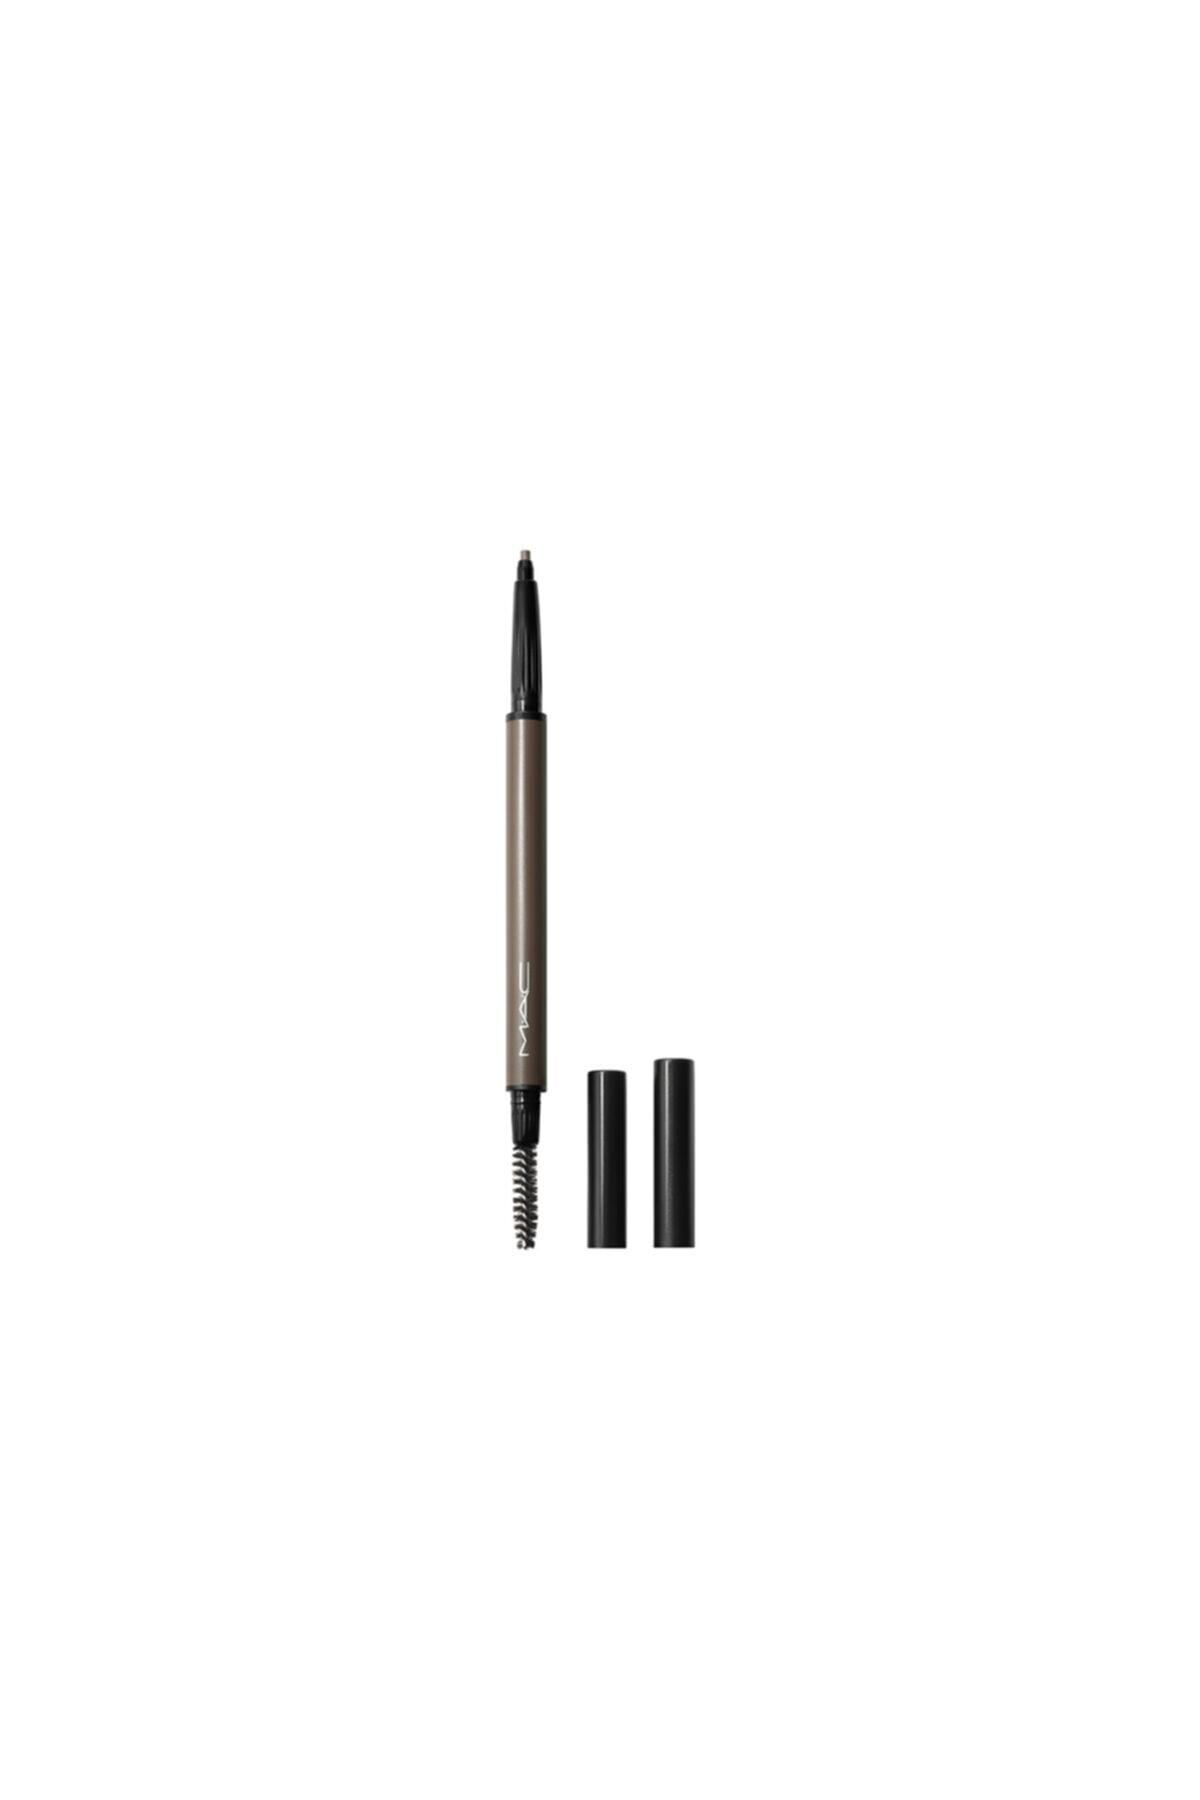 Mac EYE BROWS STYLER / -EYEBROW SHAPER TAUPE THAT PLUMPS THE EYEBROWS PSSN2109